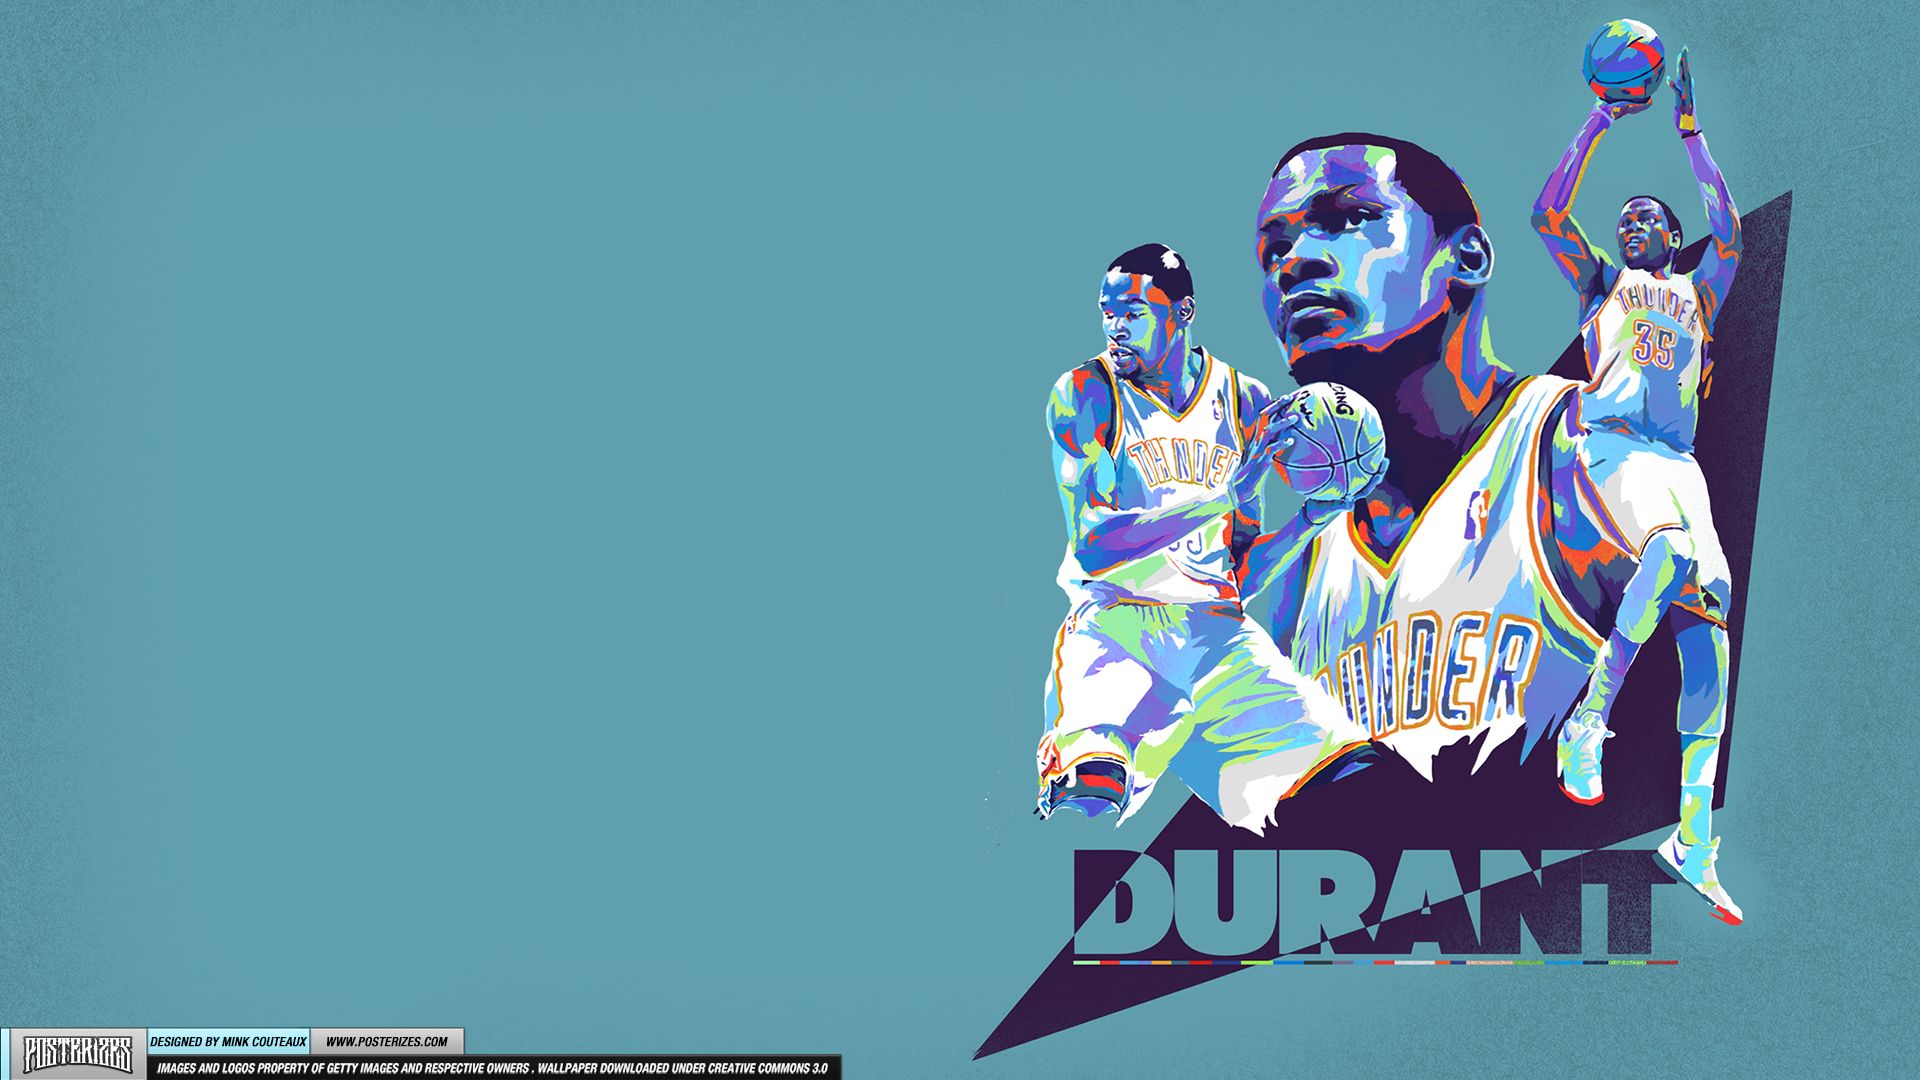 Kevin Durant Iphone 5 Case wallpaper 242547